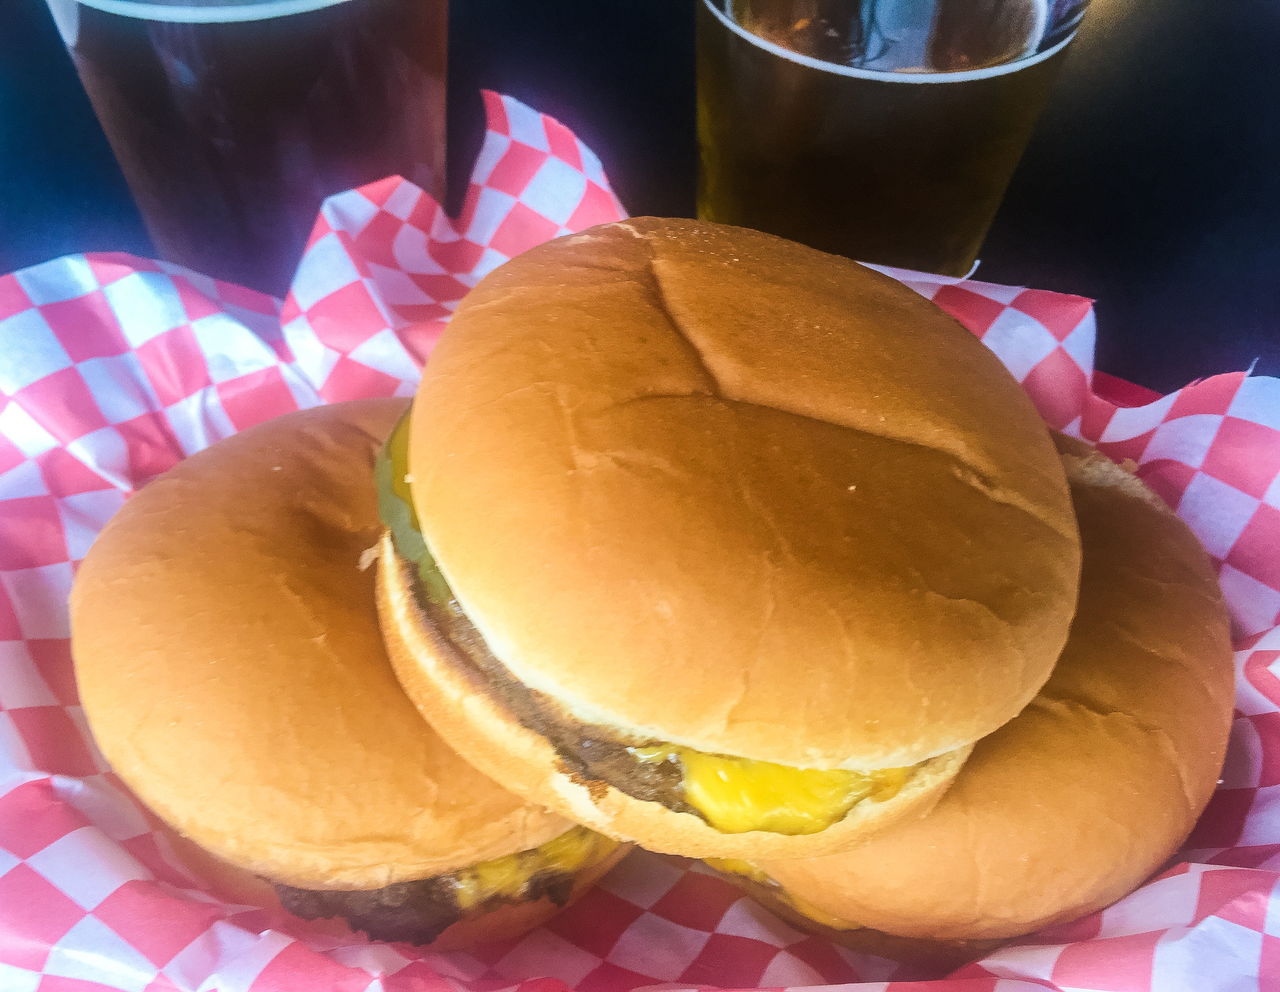 Sliders are $1.50 at Soundview Bar & Grill.